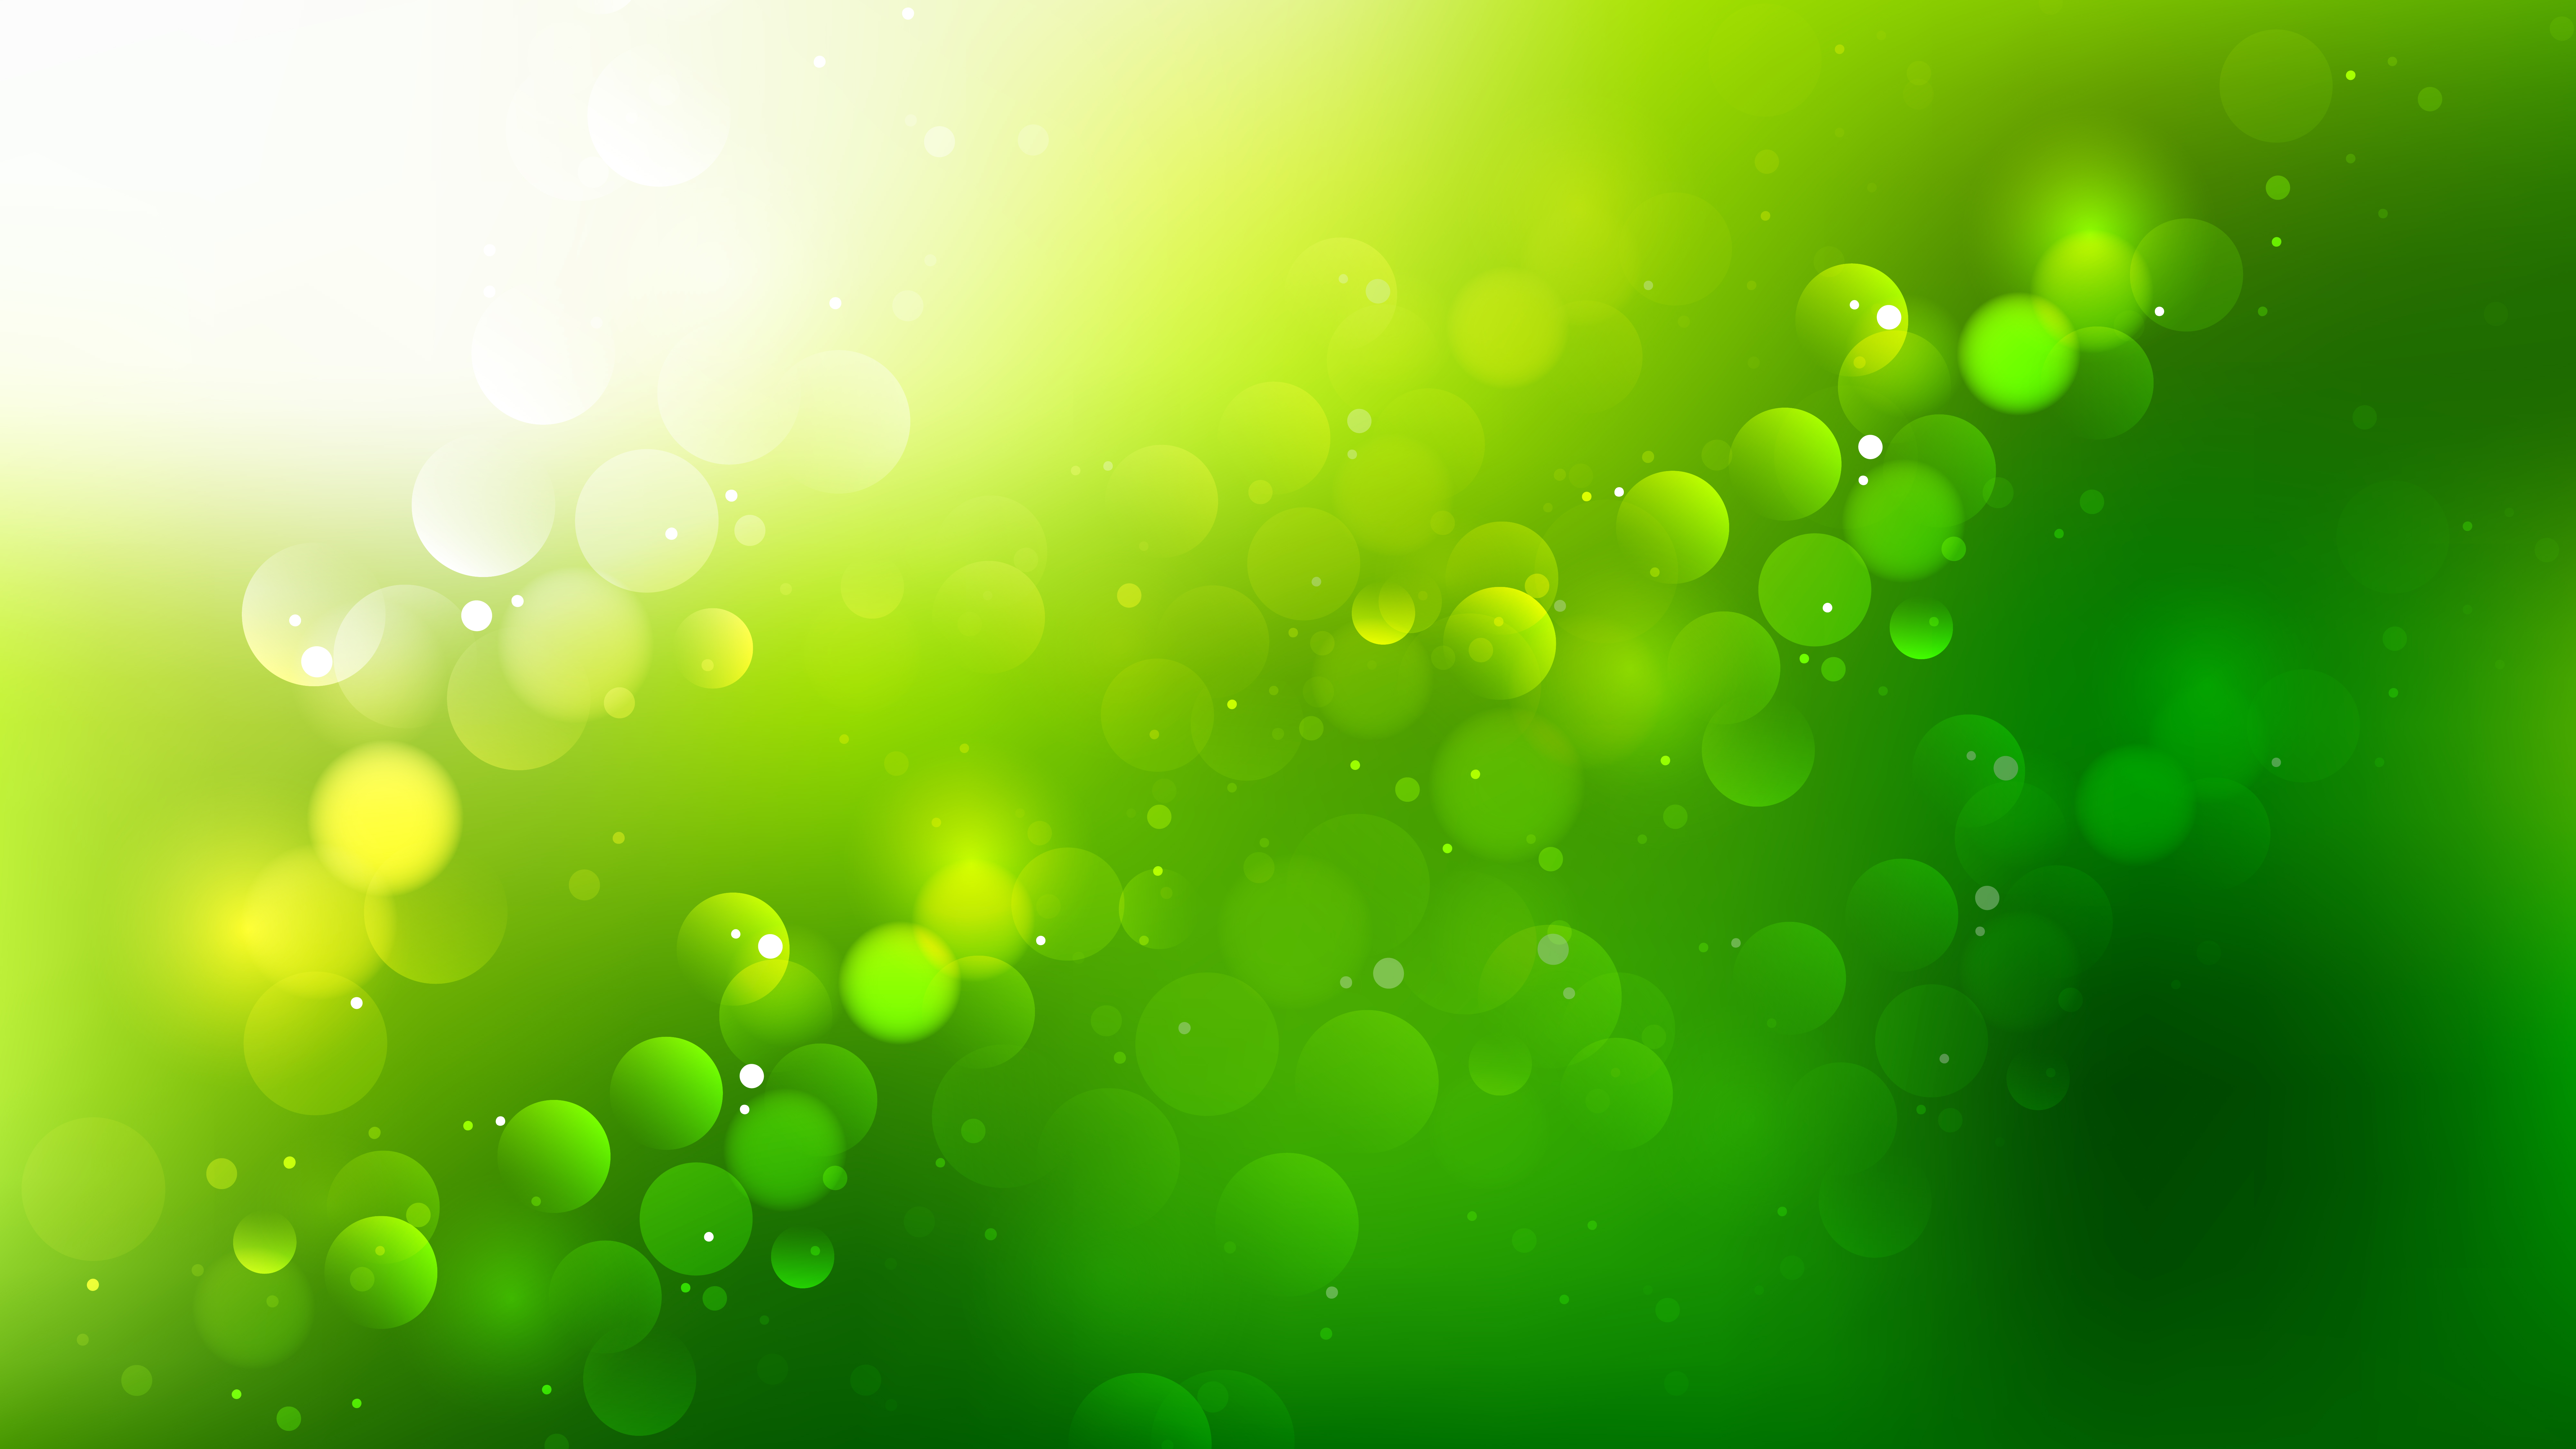 Free Abstract Green Yellow and White Blurry Lights Background